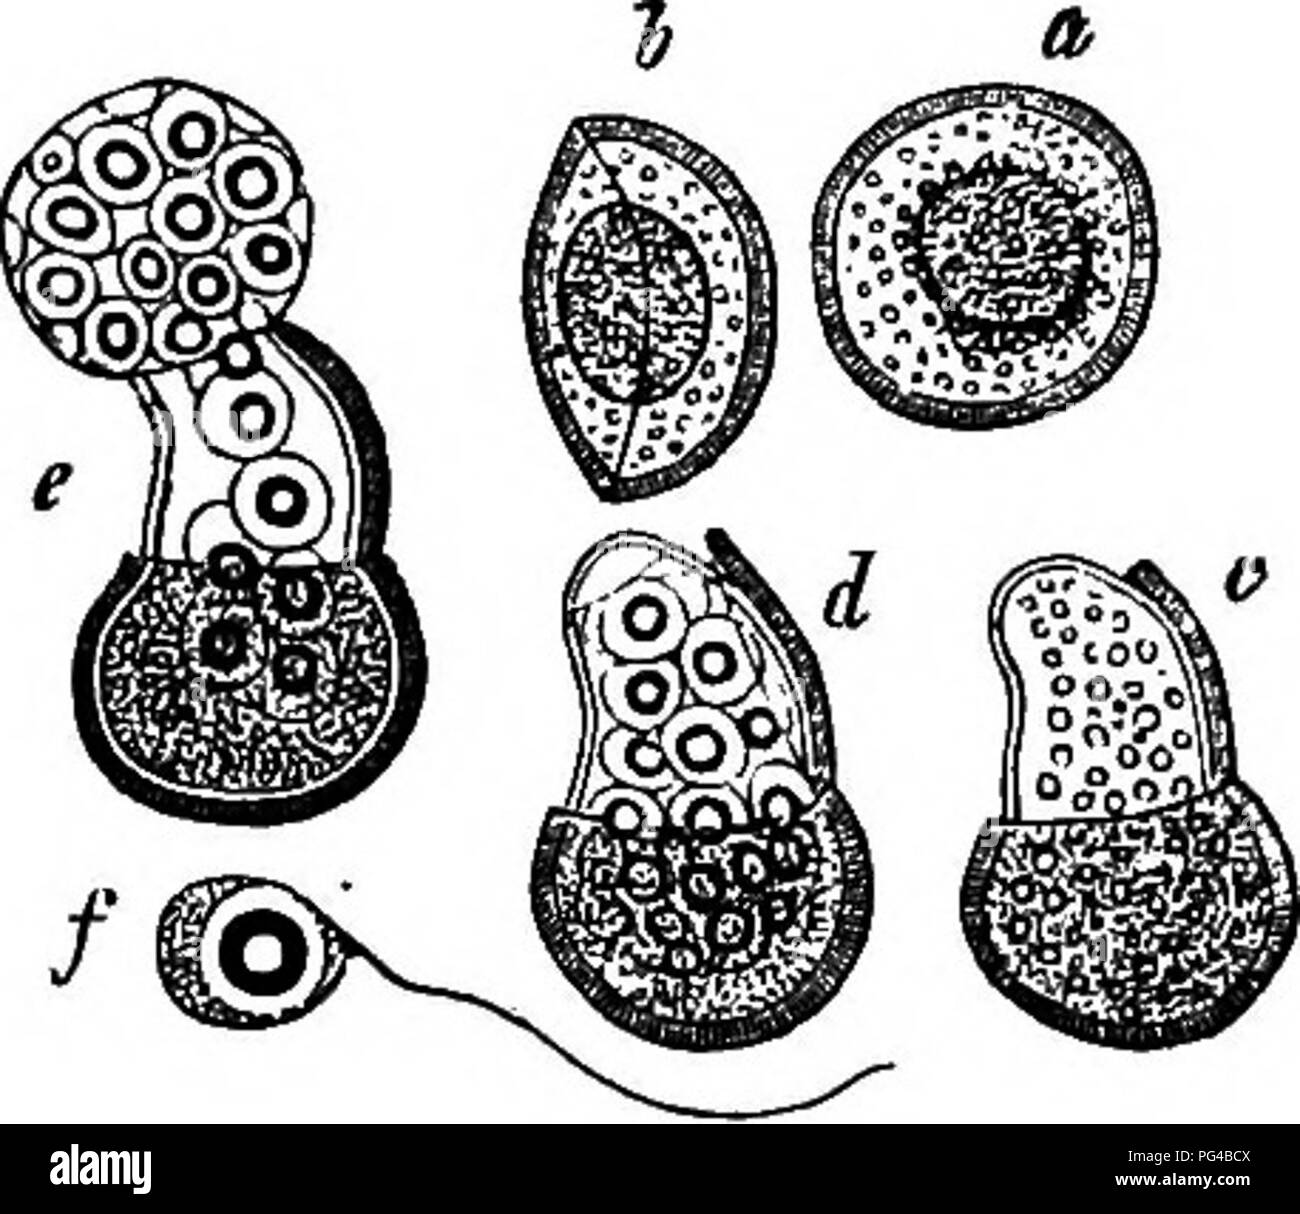 . Comparative morphology and biology of the fungi, mycetozoa and bacteria . Plant morphology; Fungi; Myxomycetes; Bacteriology. i66 DIVISION II.—COURSE OF DEVELOPMENT OF FUNGI. A second series of forms are intracellular parasites in the living and otherwise sound foliage of some of the marsh plants infested by the first mentioned group. They form brown spots or pustules on the leaves, and spread from cell to cell, and often produce a large number of sporangia in each cell without coming out to the surface of the plaiit. To this group belongs the form which has been described as Protomyces Meny Stock Photo